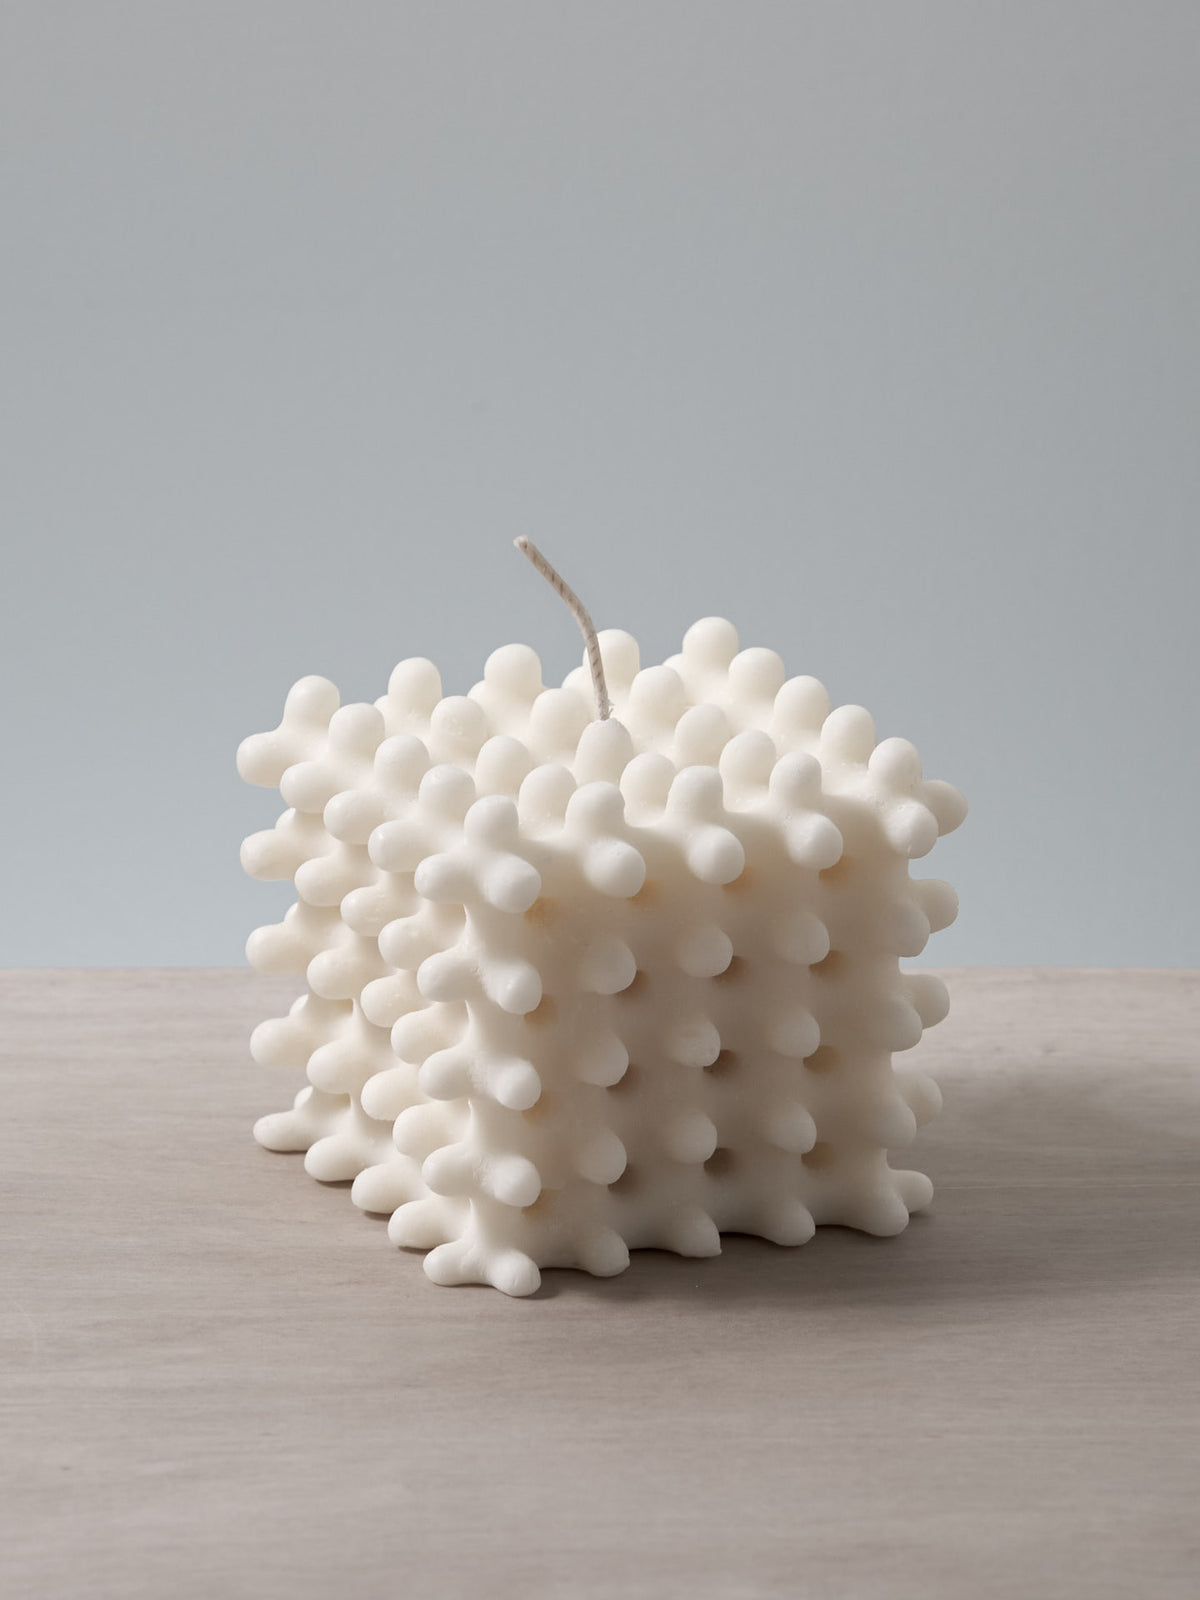 A white Lace Candle shaped like a cube sitting on a table, made by Andrej Urem.